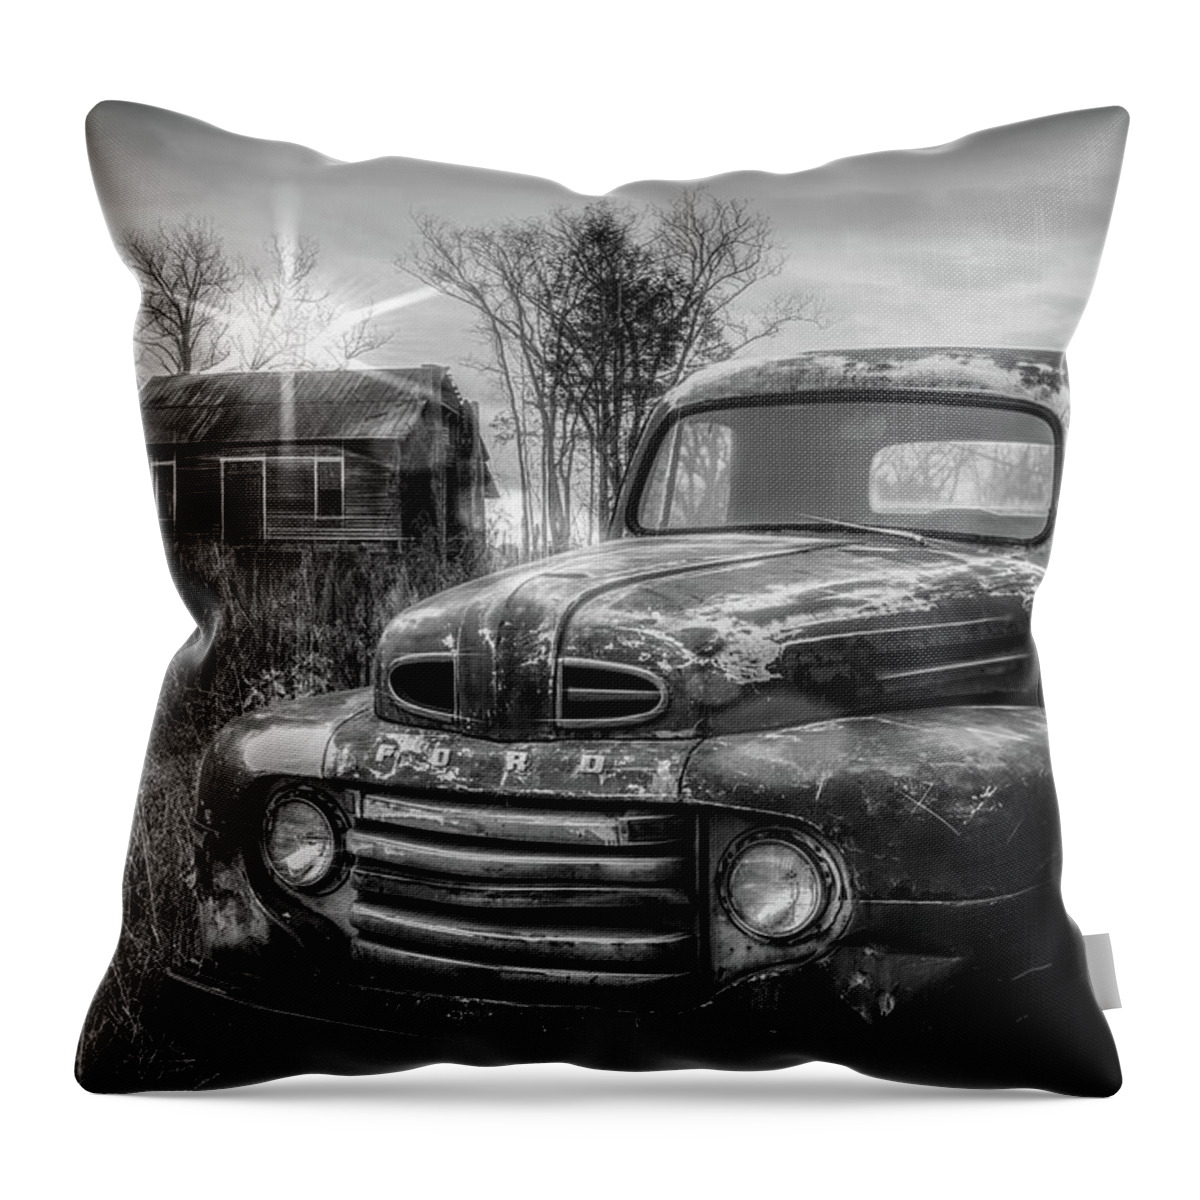 1948 Throw Pillow featuring the photograph Vintage Classic Ford Pickup Truck in Black and White by Debra and Dave Vanderlaan